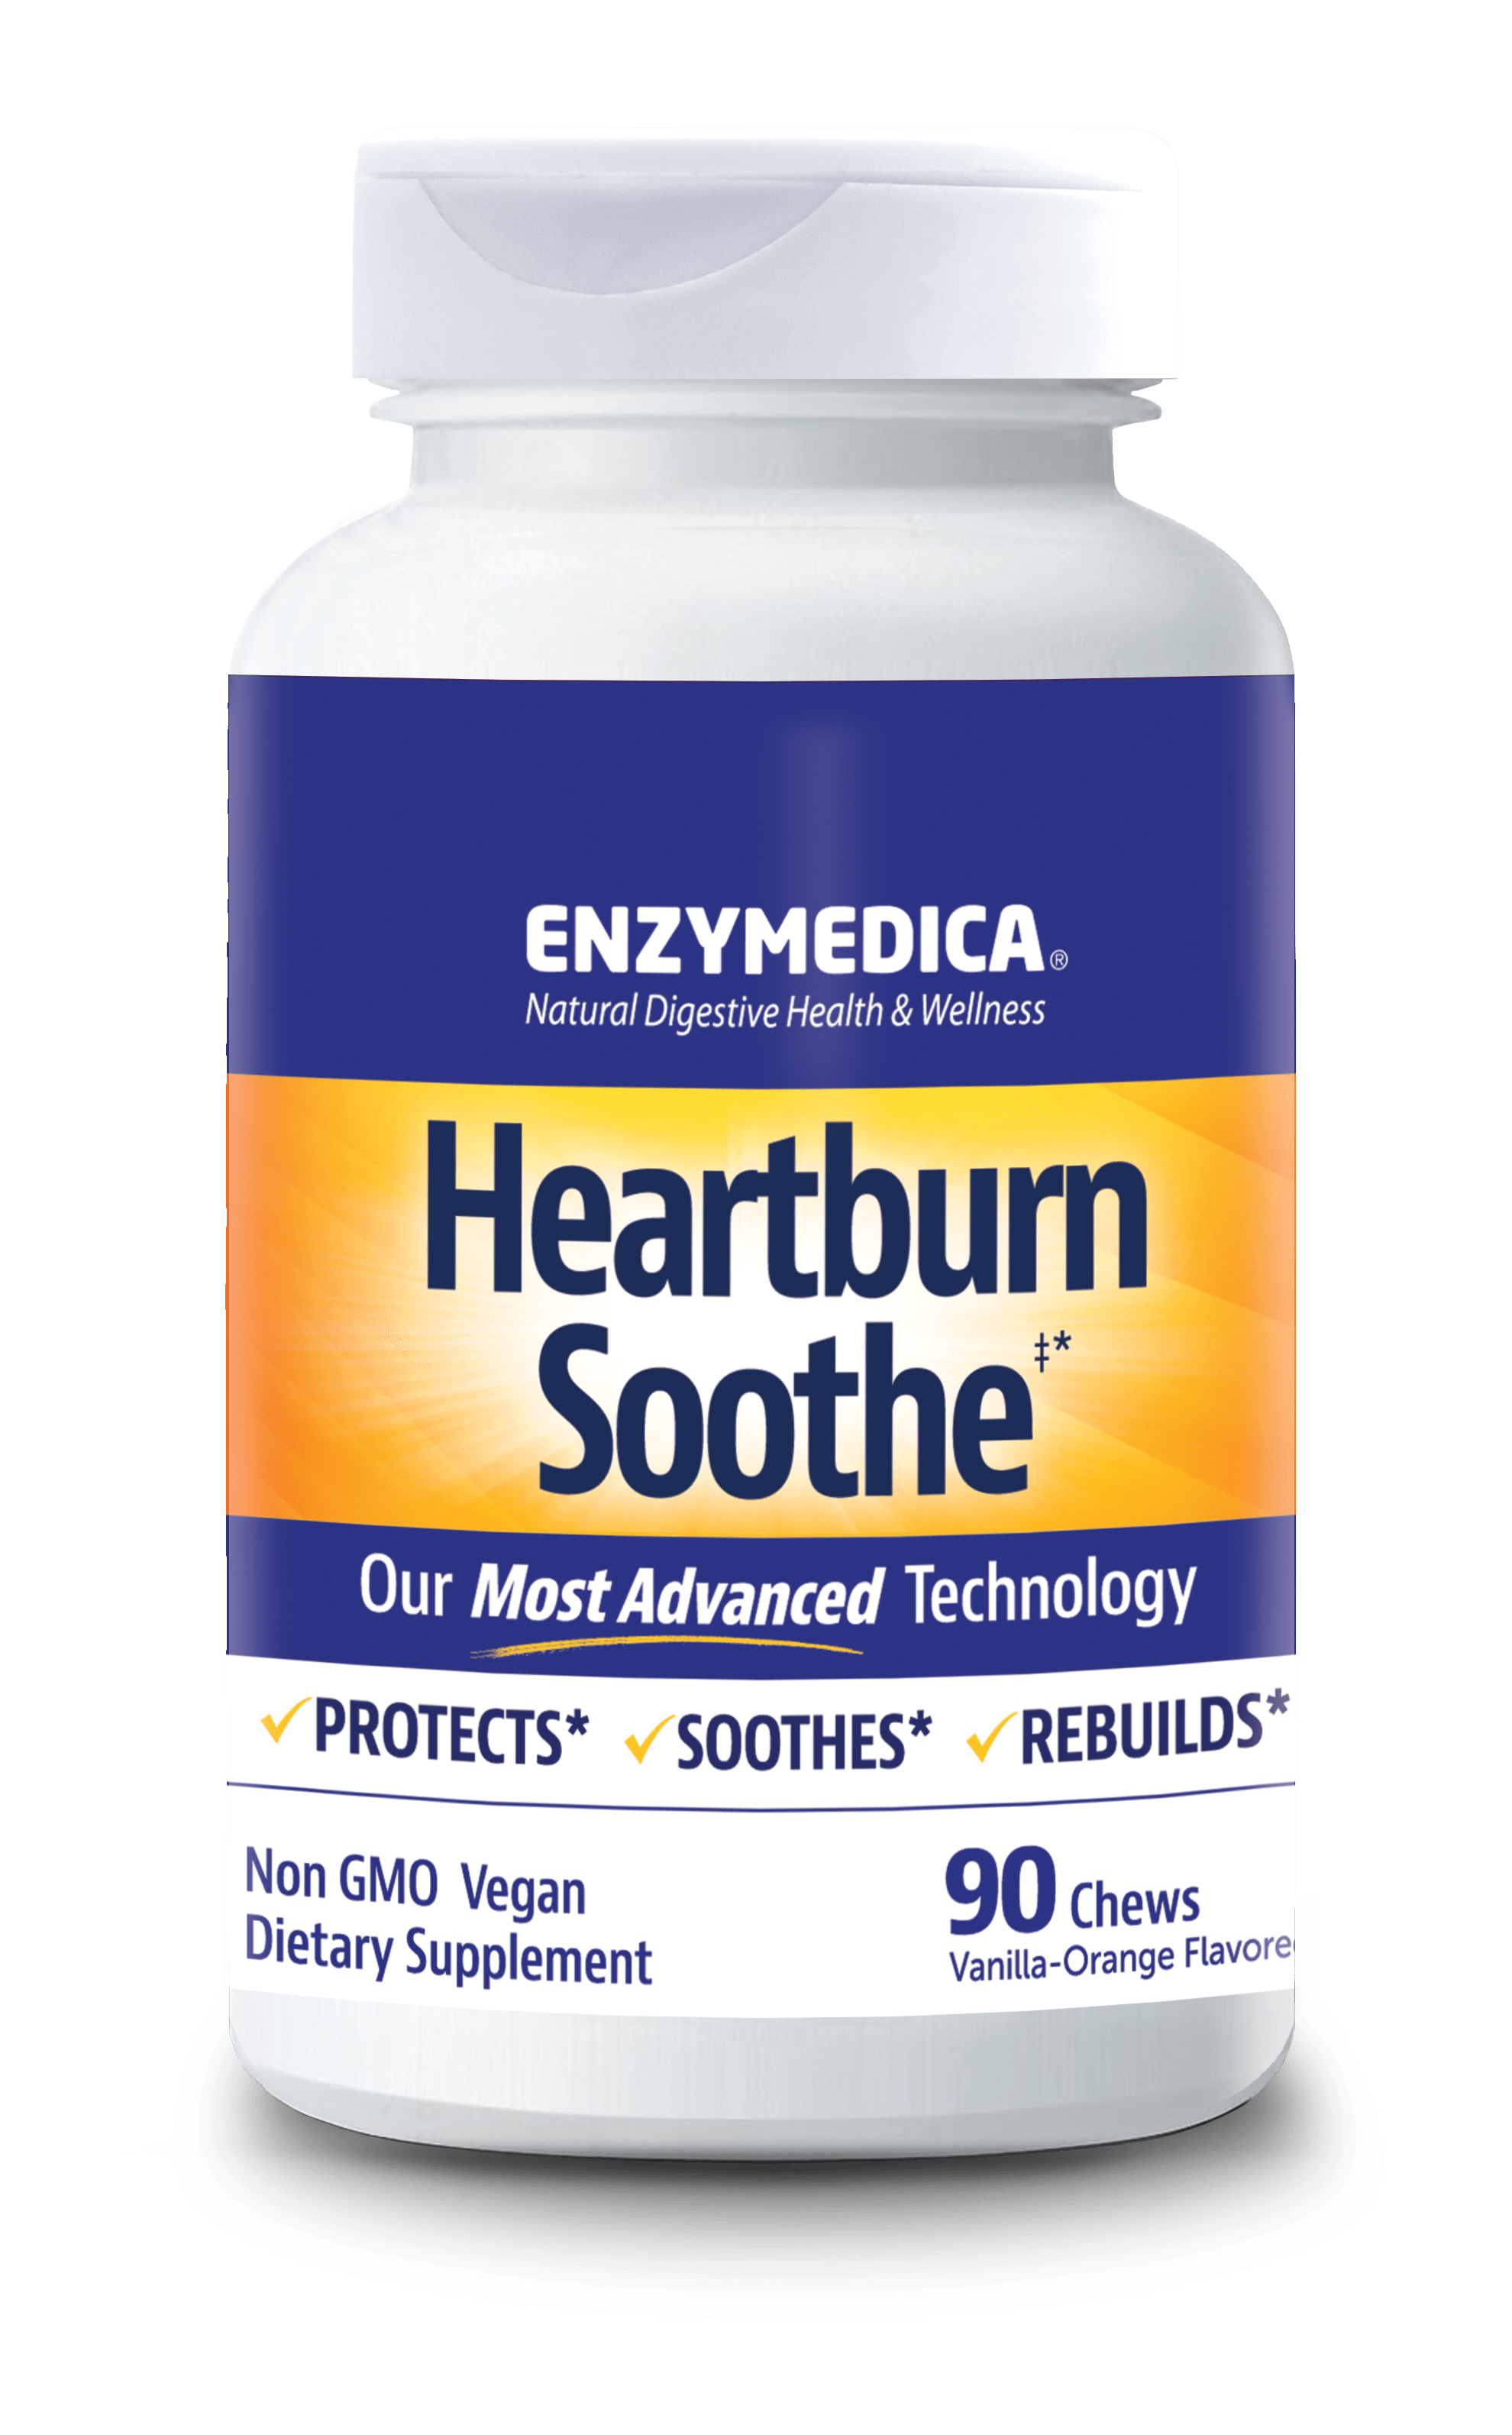 Heartburn Soothe 90 count bottle from Enzymedica